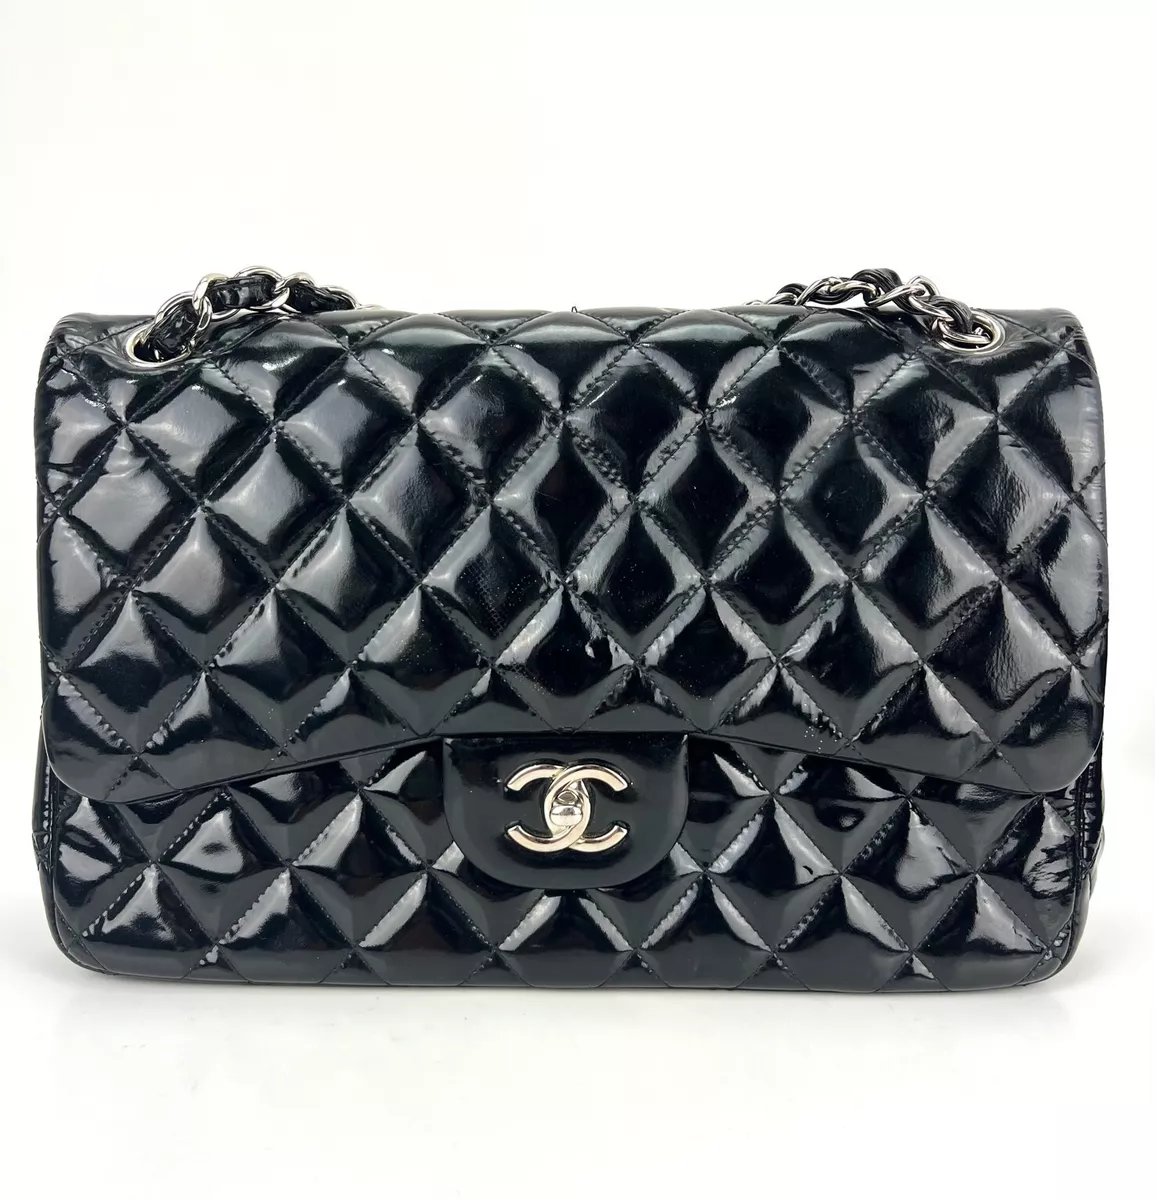 CHANEL Classic Jumbo Double Flap Quilted Black Patent Leather Bag